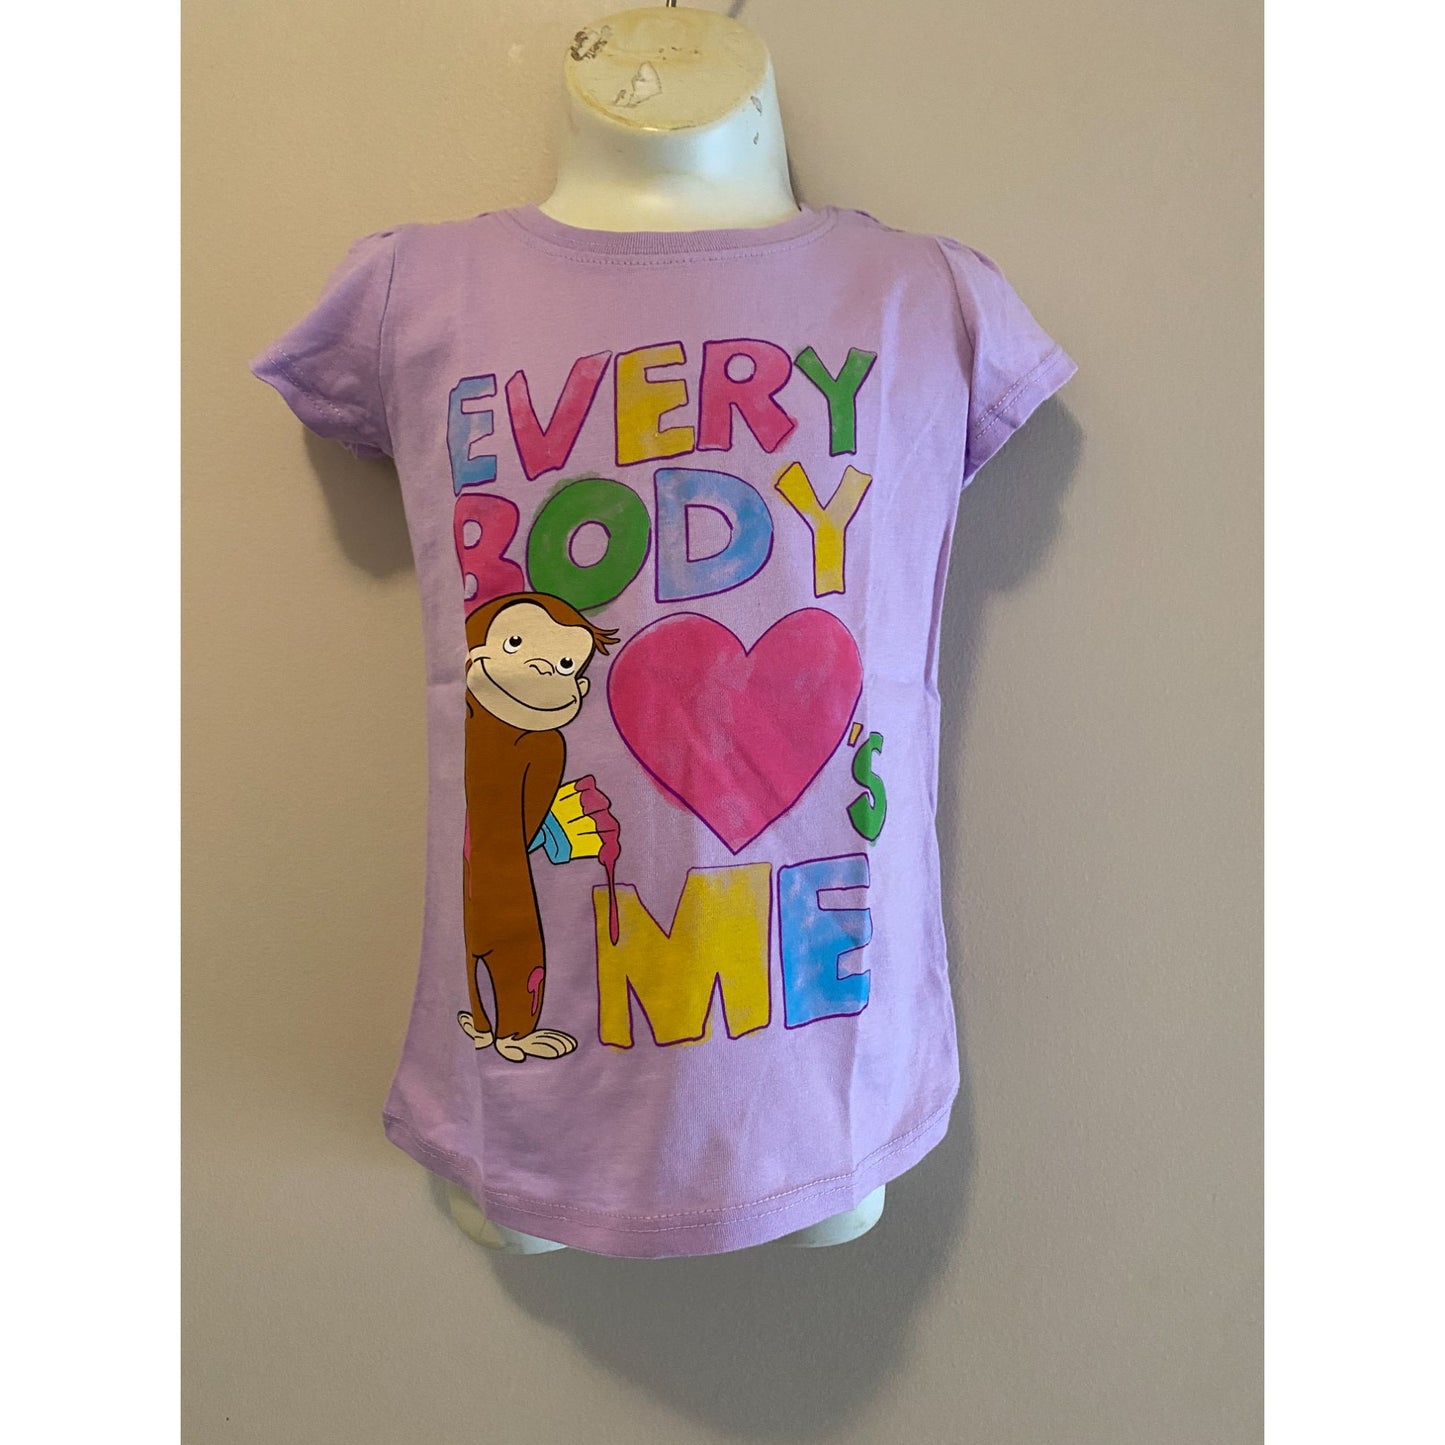 Toddler Girl Curious George T-Shirt,  Purple Size 3T, Officially Licensed Top